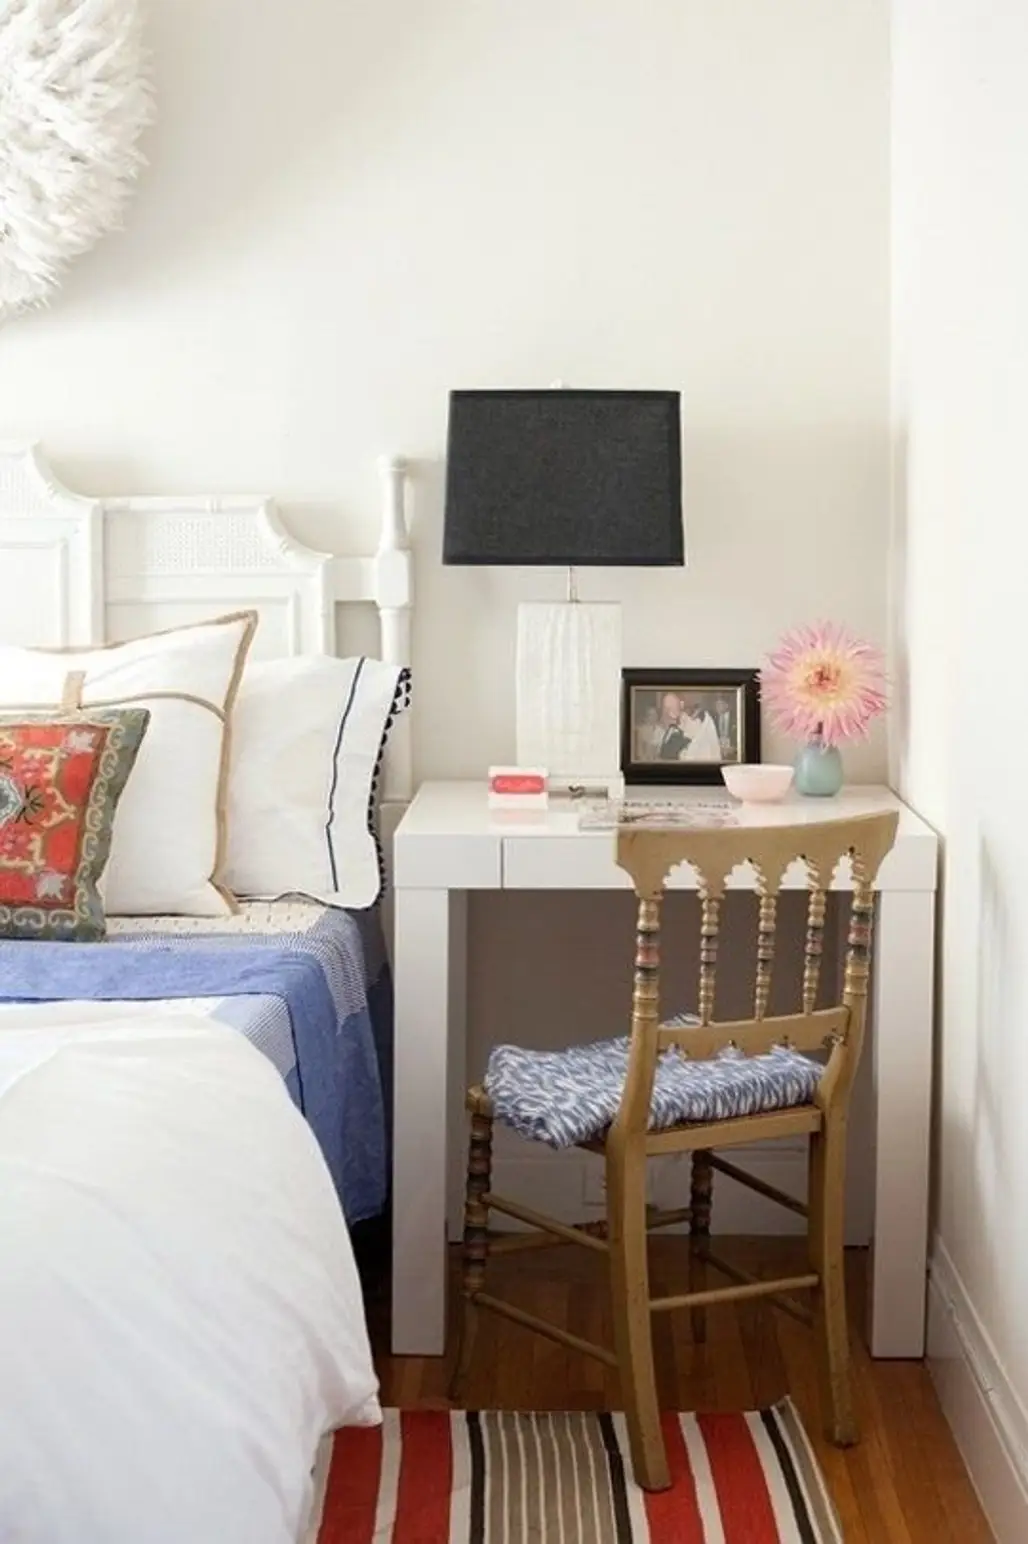 Have a Nightstand That Doubles as a Desk